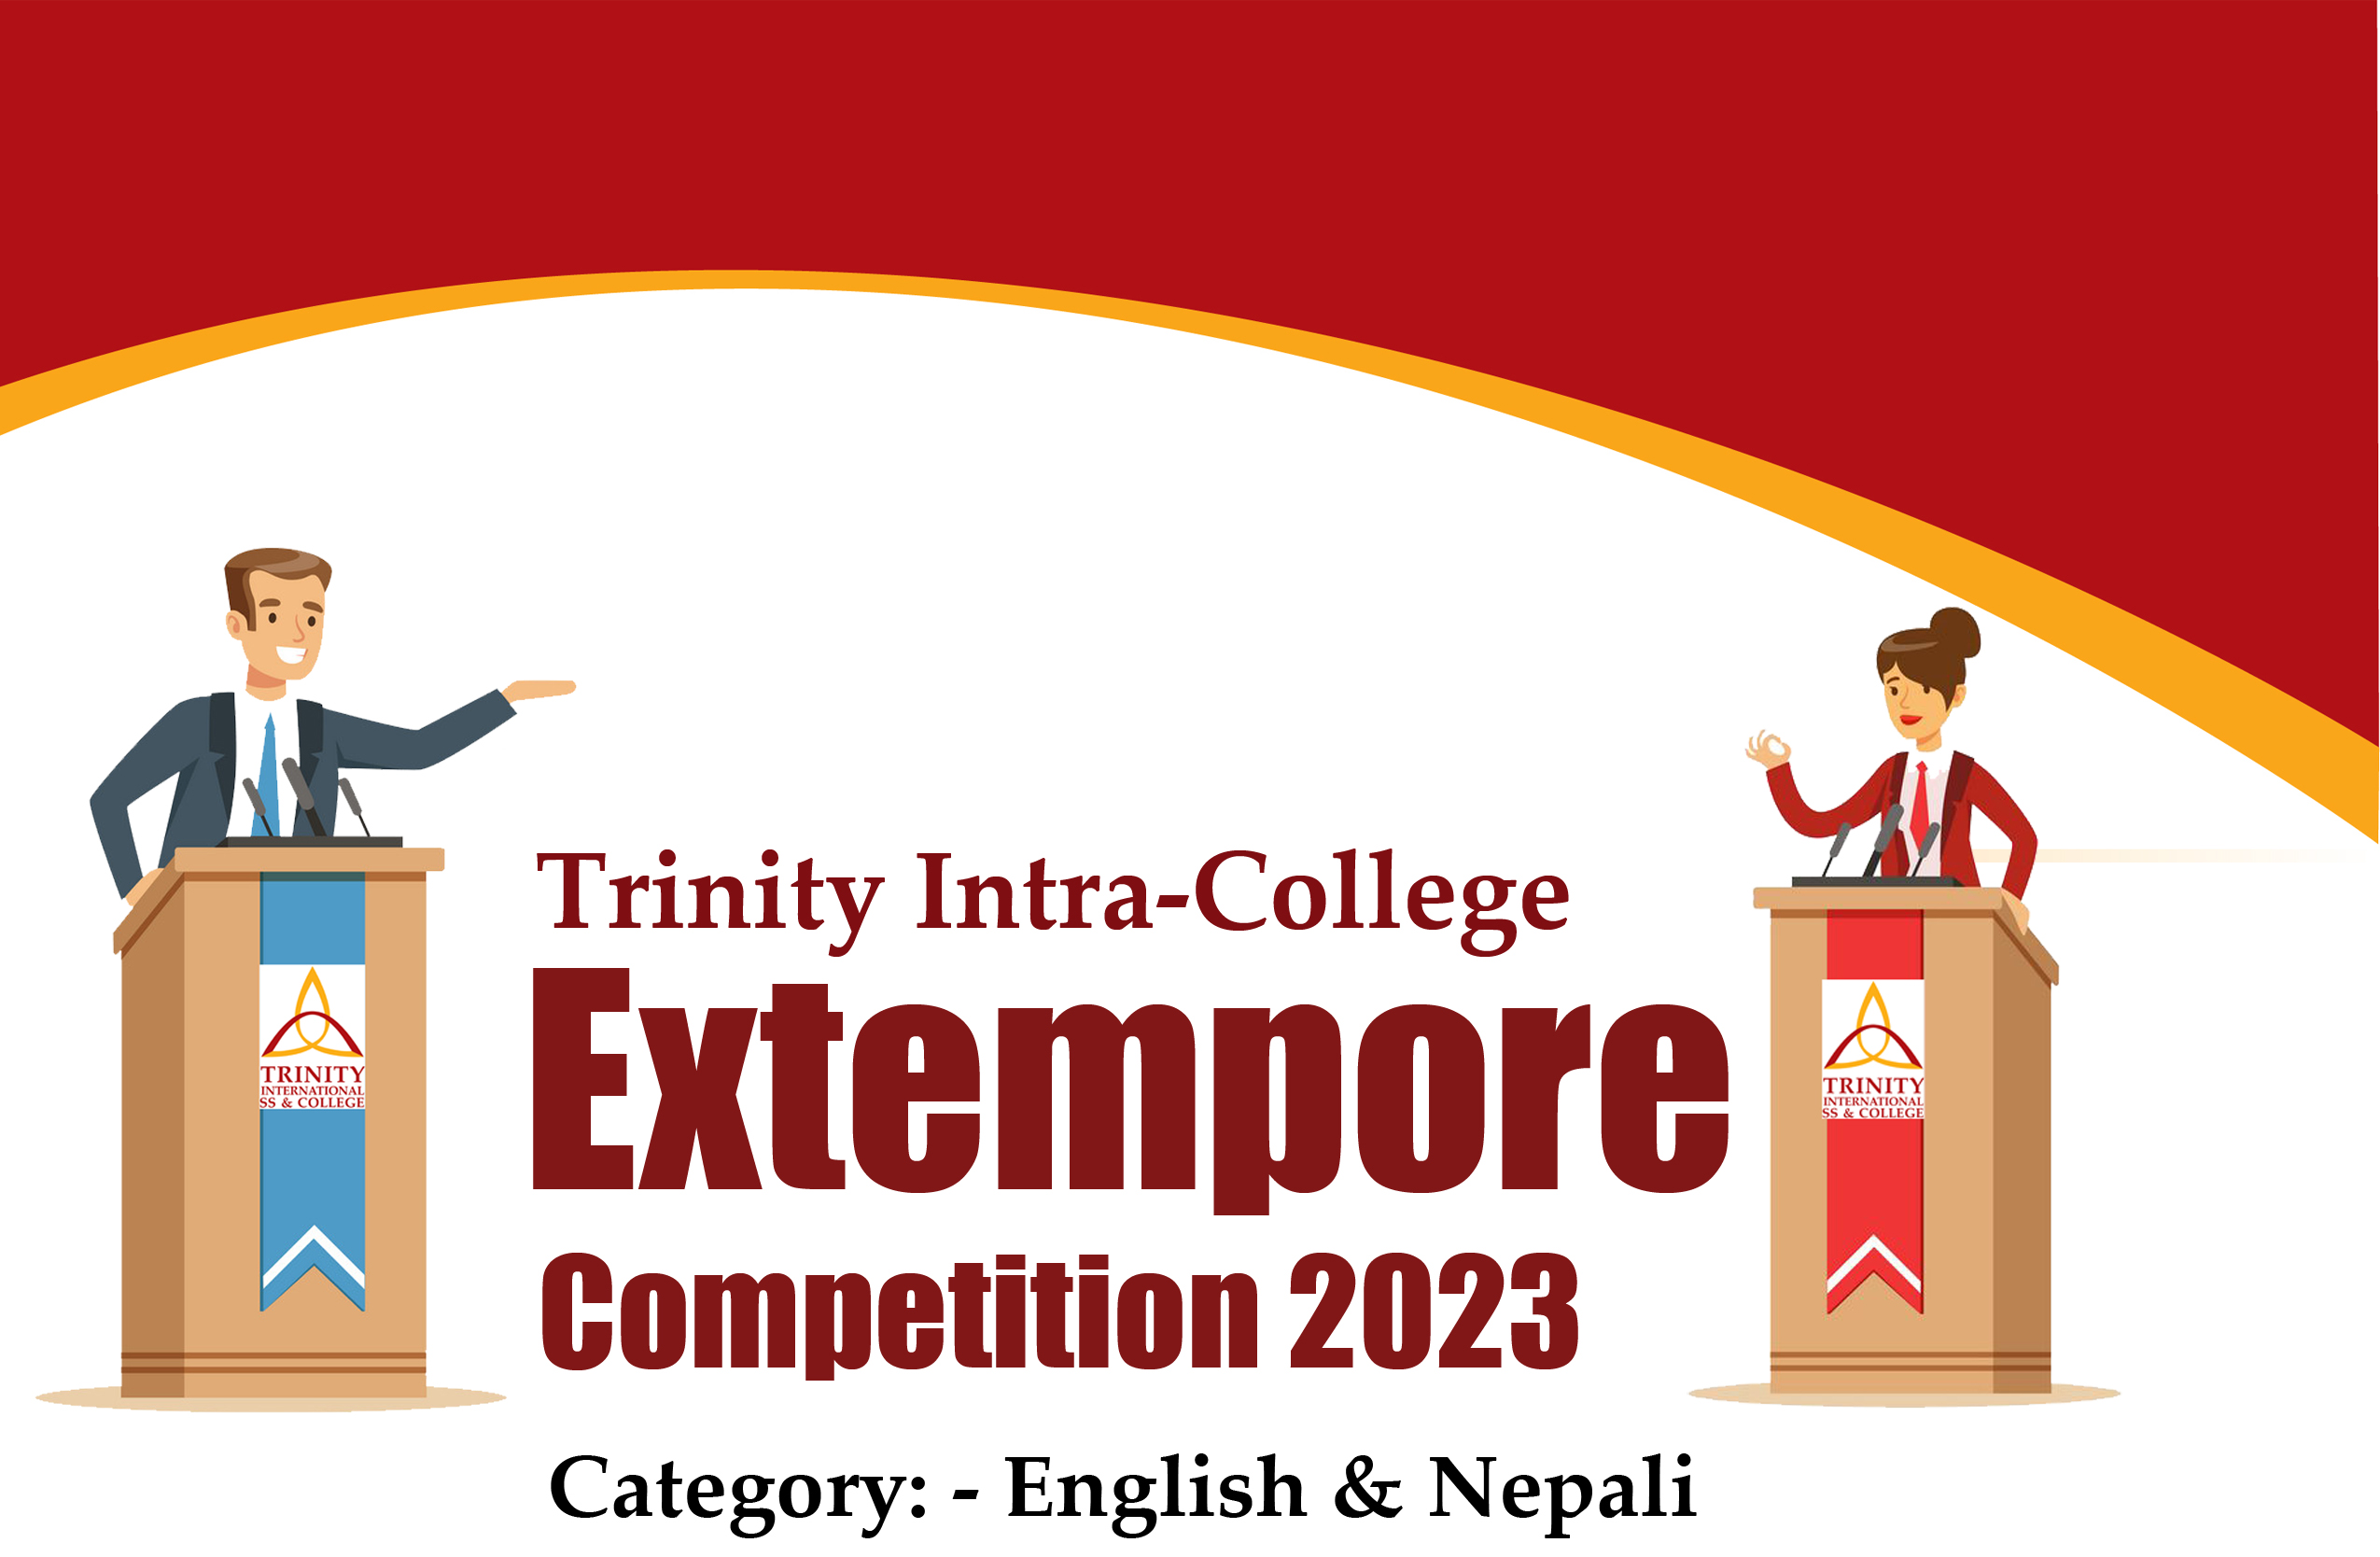 Intra-College Extempore Competition 2023